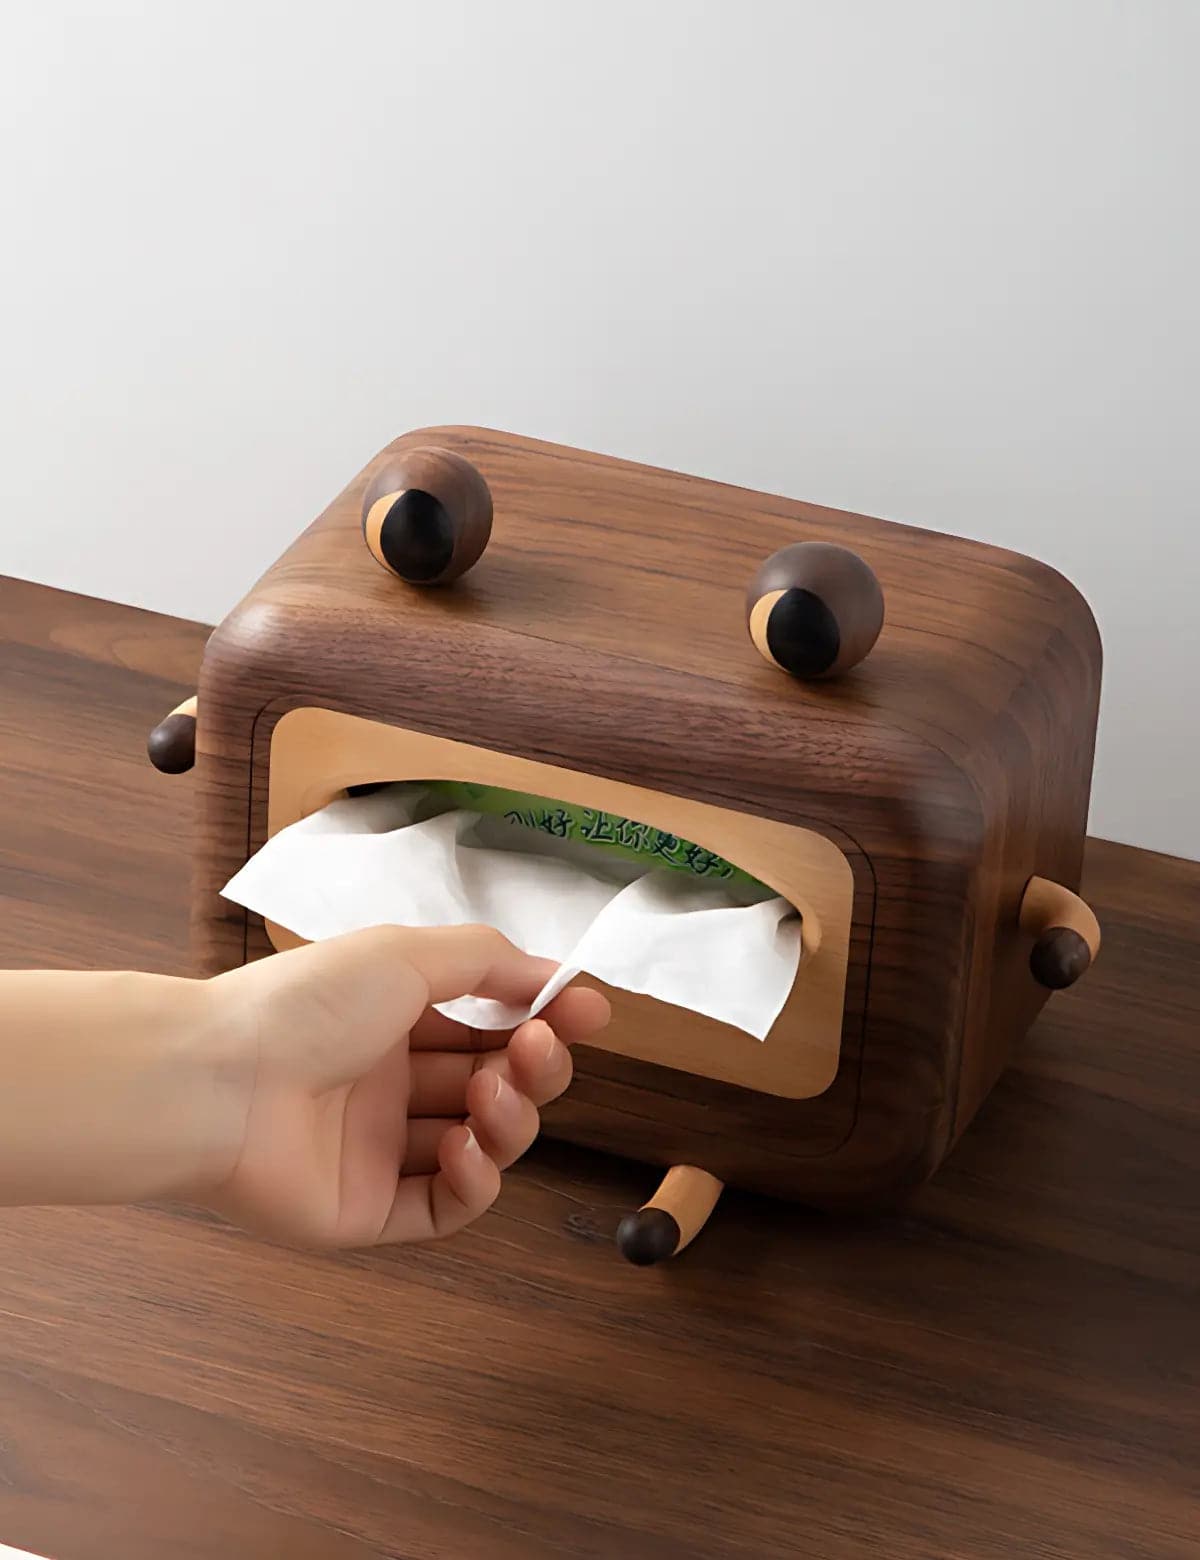 mr-frog-wooden-tissue-box-handcrafted-countertop-decor-03